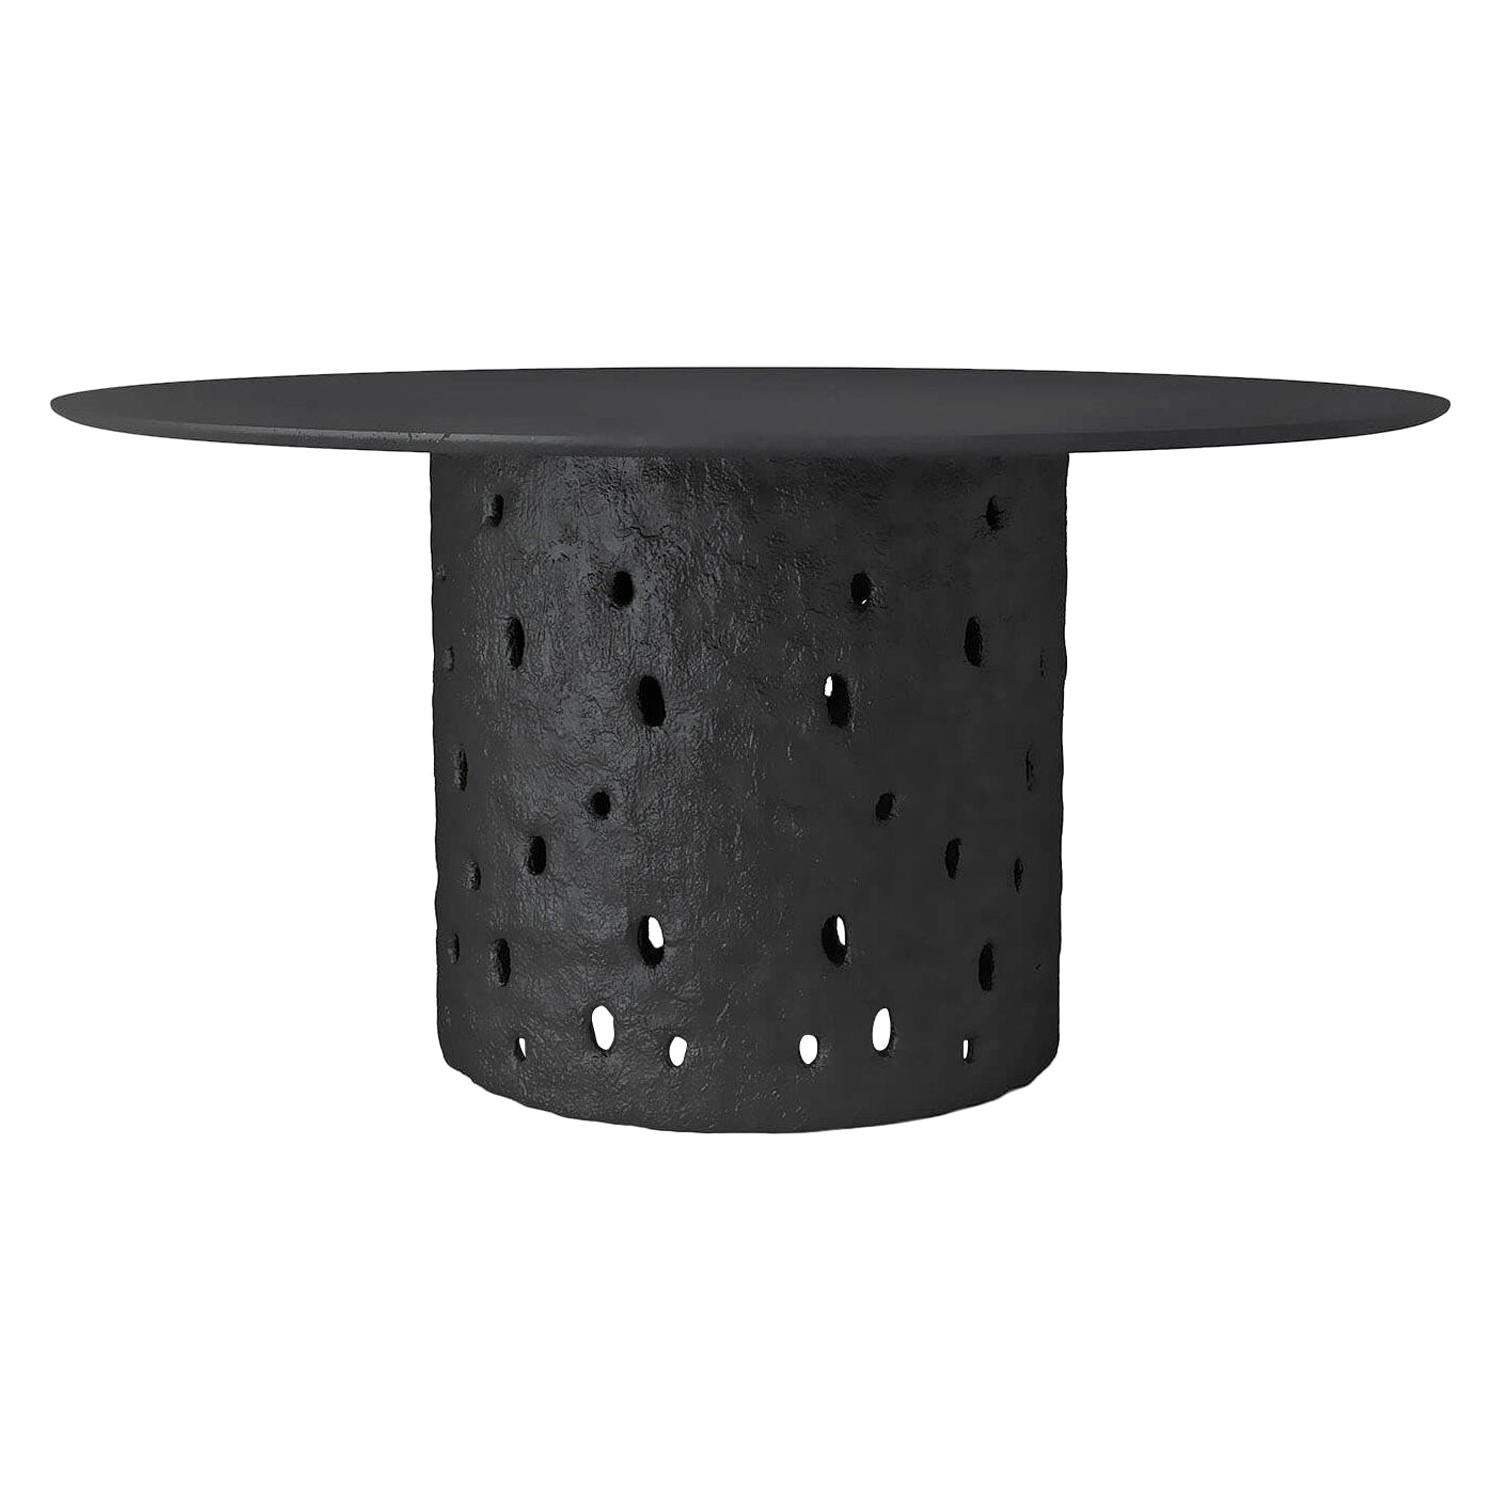 Sculpted Contemporary Dining Table by FAINA